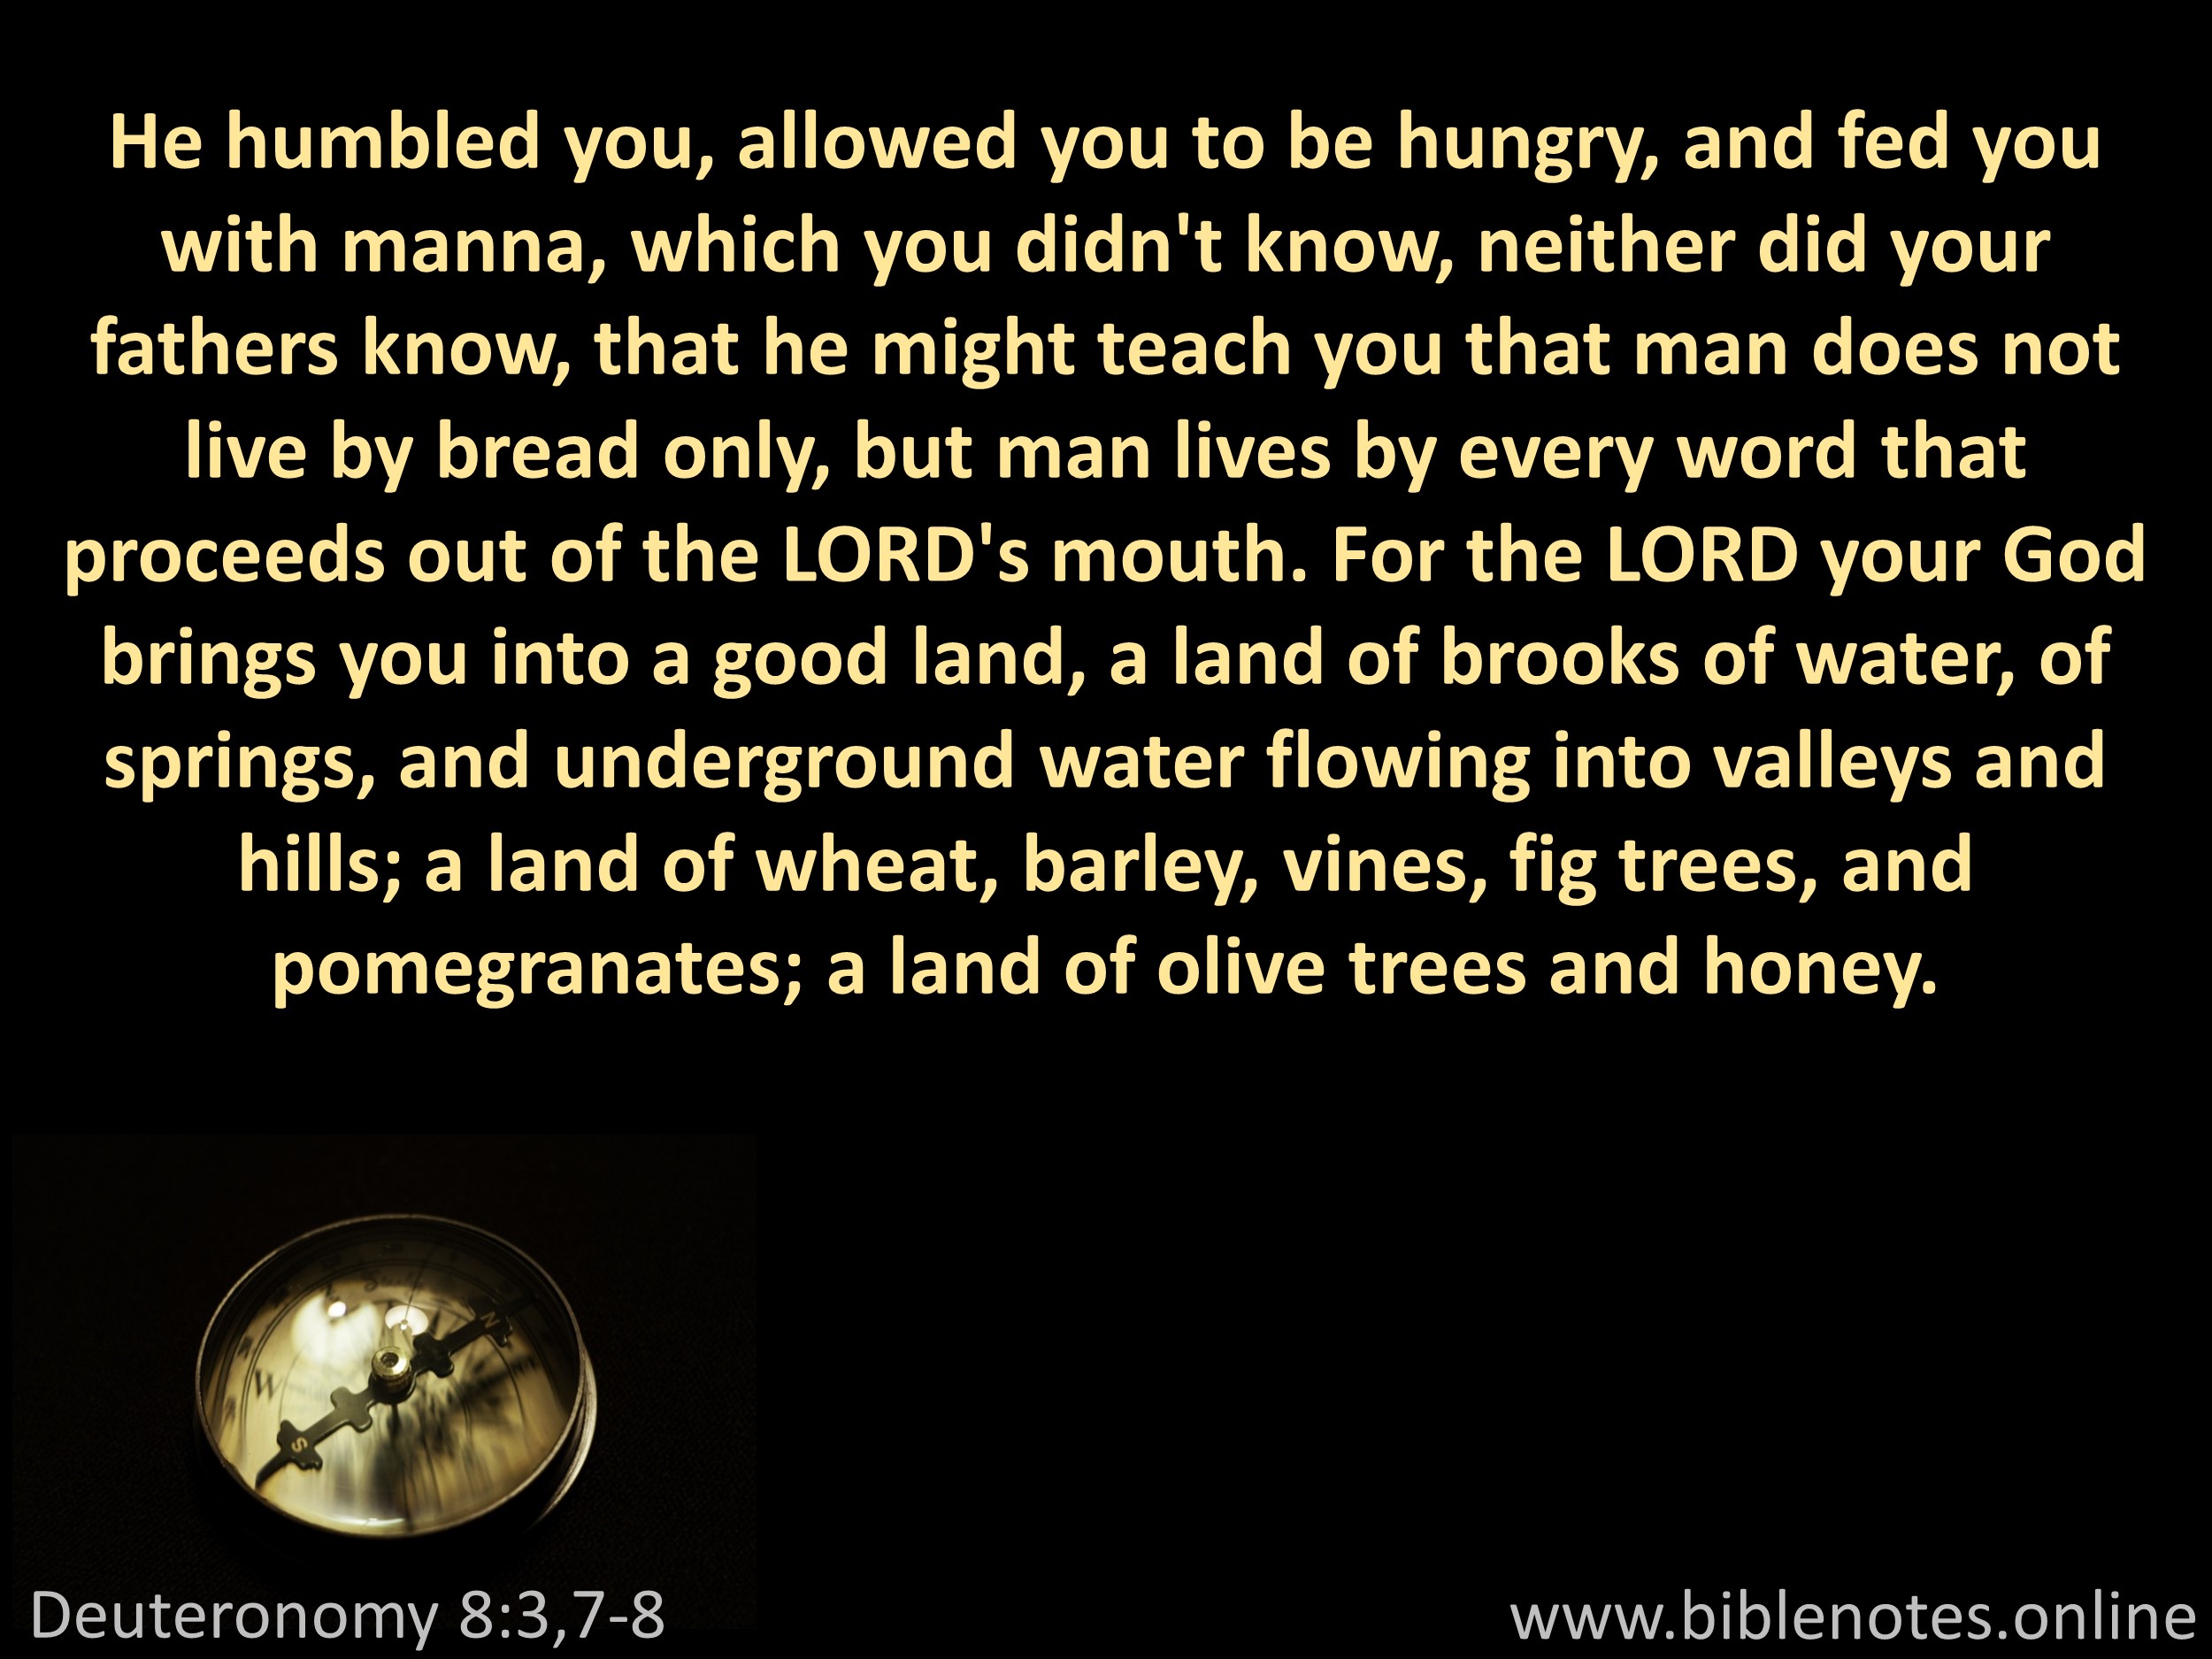 Bible Verse from Deuteronomy Chapter 8